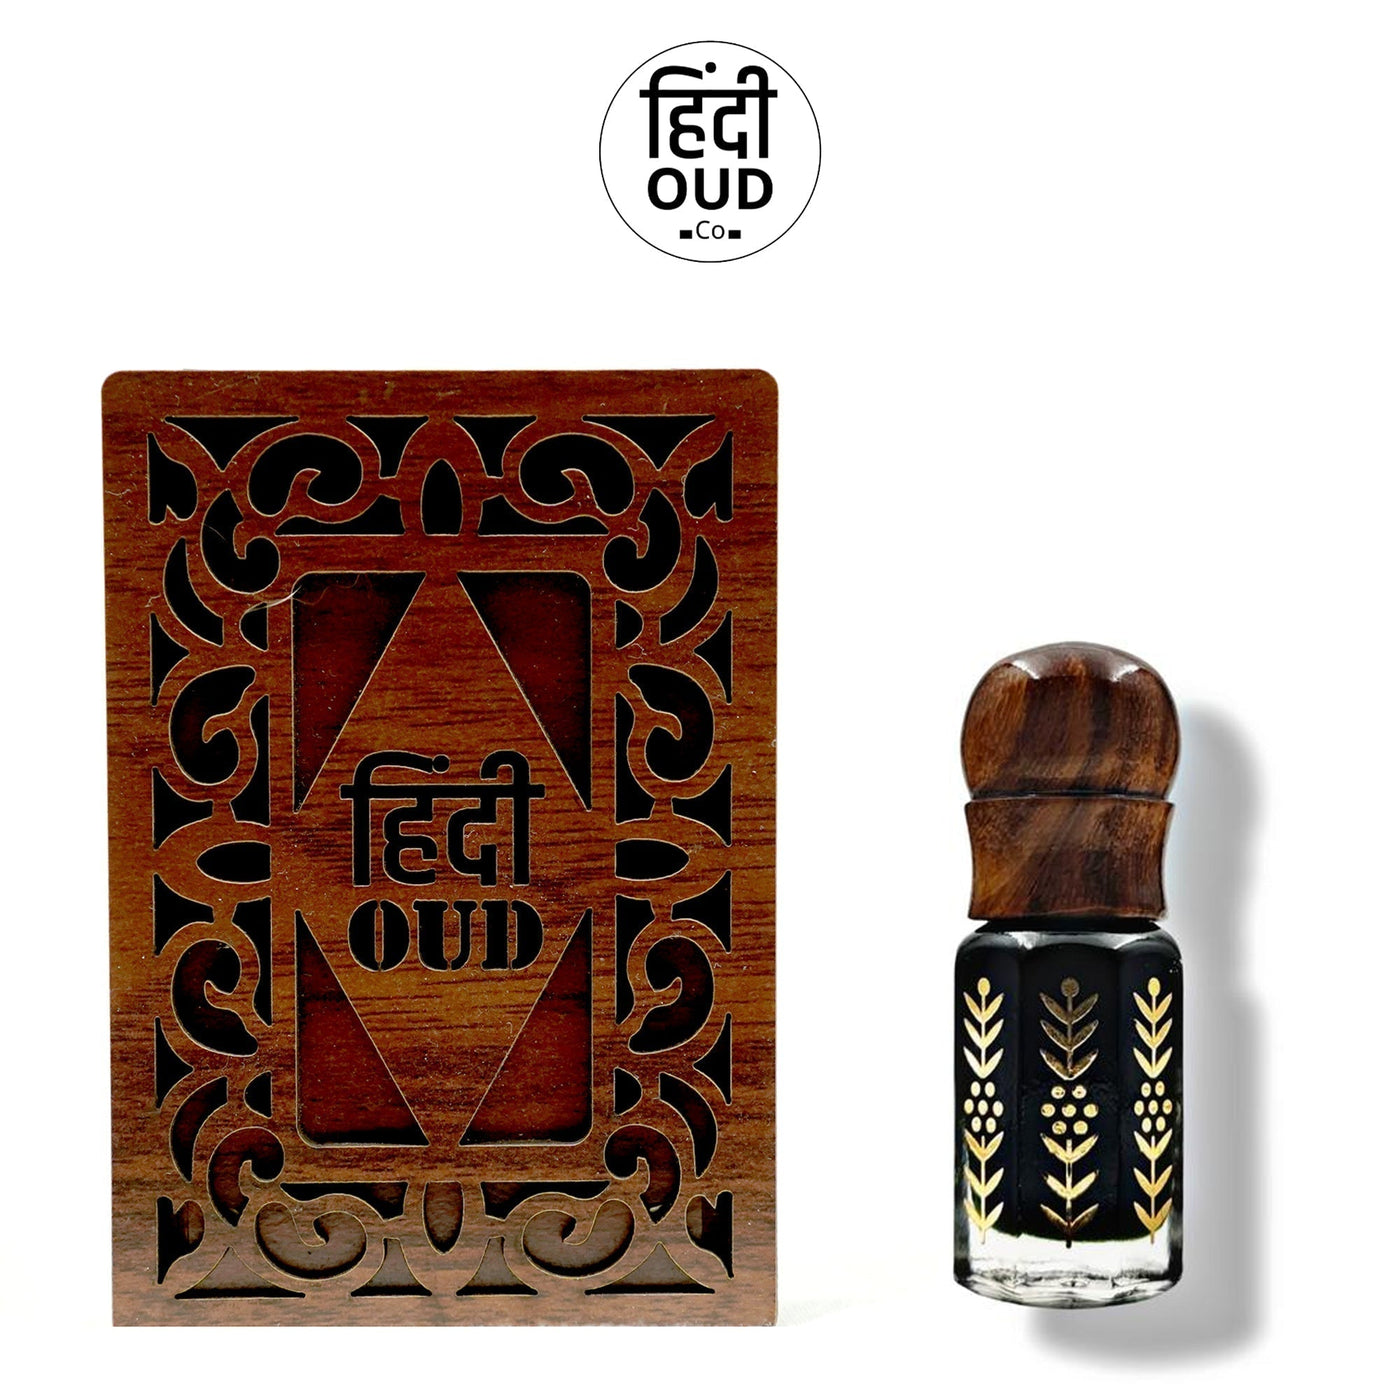 Hindi Oud Co Presents - Combodian Oud Top Grade Raw Oud Oil from Combodia